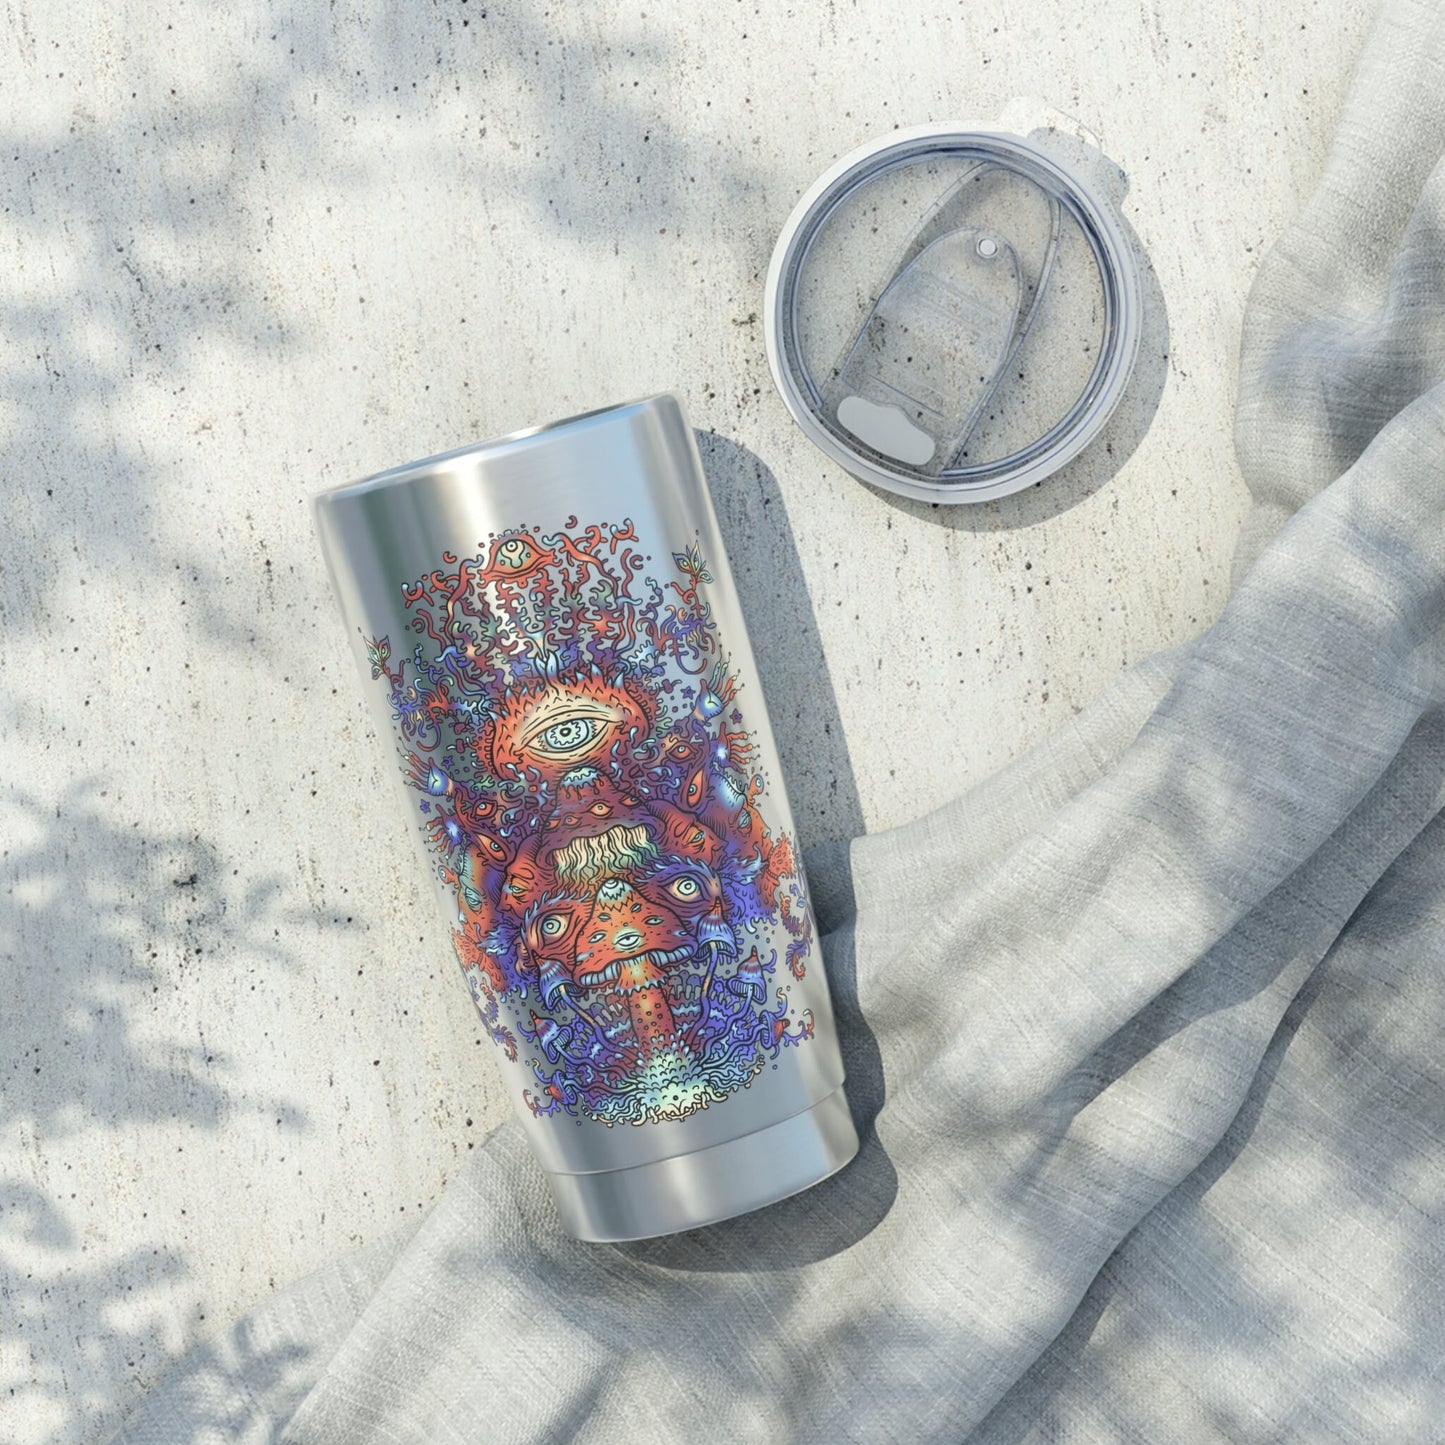 Shrooms Travel Mug 20oz Insulated Stainless Steel Unique Gift Trippy Travel Mug Psychedelic Travel Mug Psychadelic Canteen Magic Mushrooms